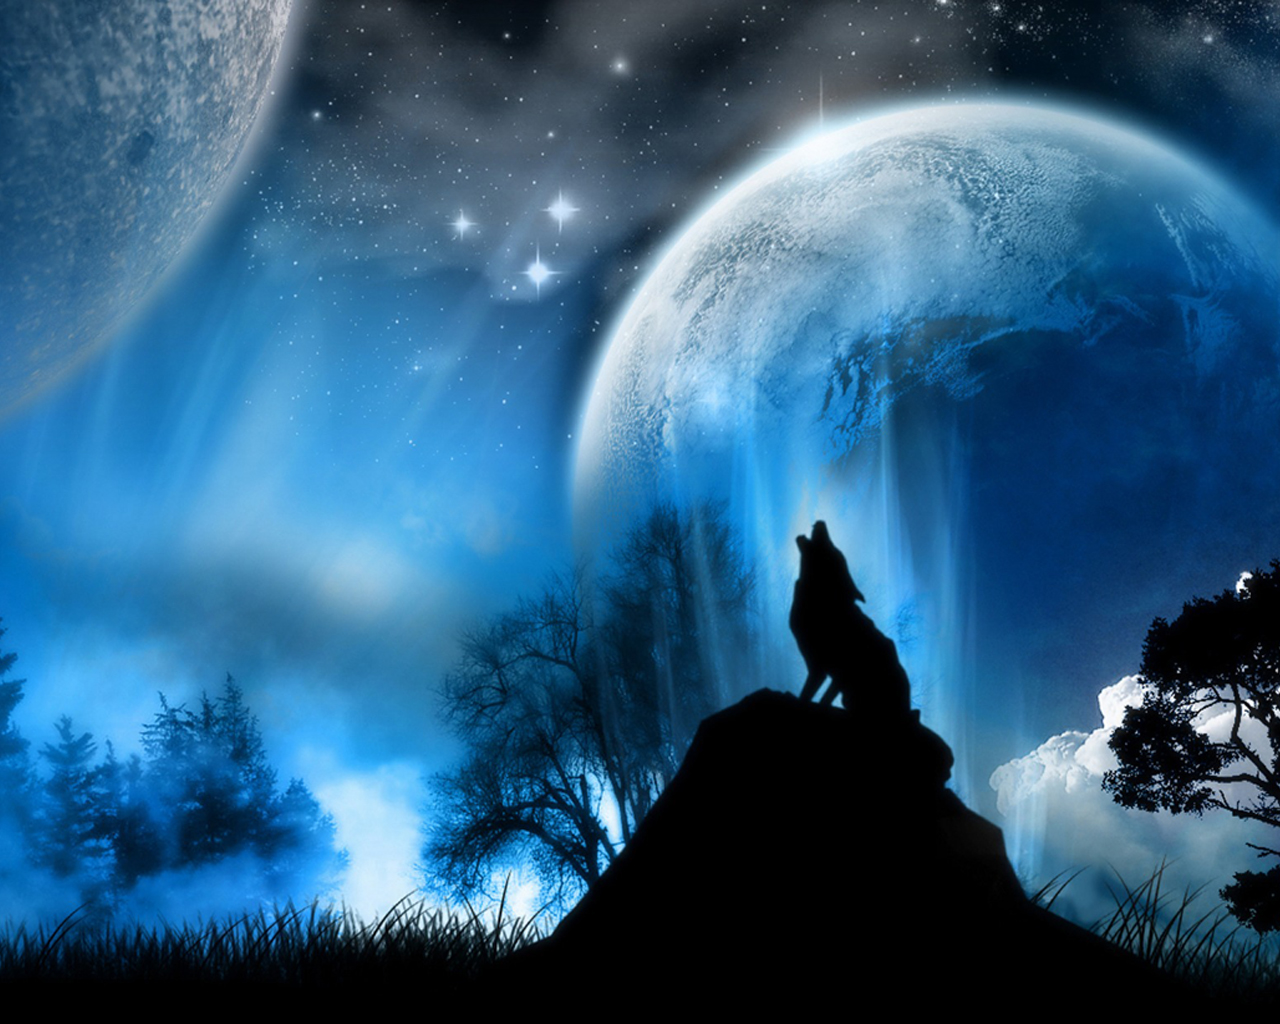 Free download 3D Wolf Laptop Wallpaper here you can see 3D Wolf Laptop  Wallpaper [1280x1024] for your Desktop, Mobile & Tablet | Explore 75+ Laptop  Background Images | Cute Laptop Backgrounds, Laptop